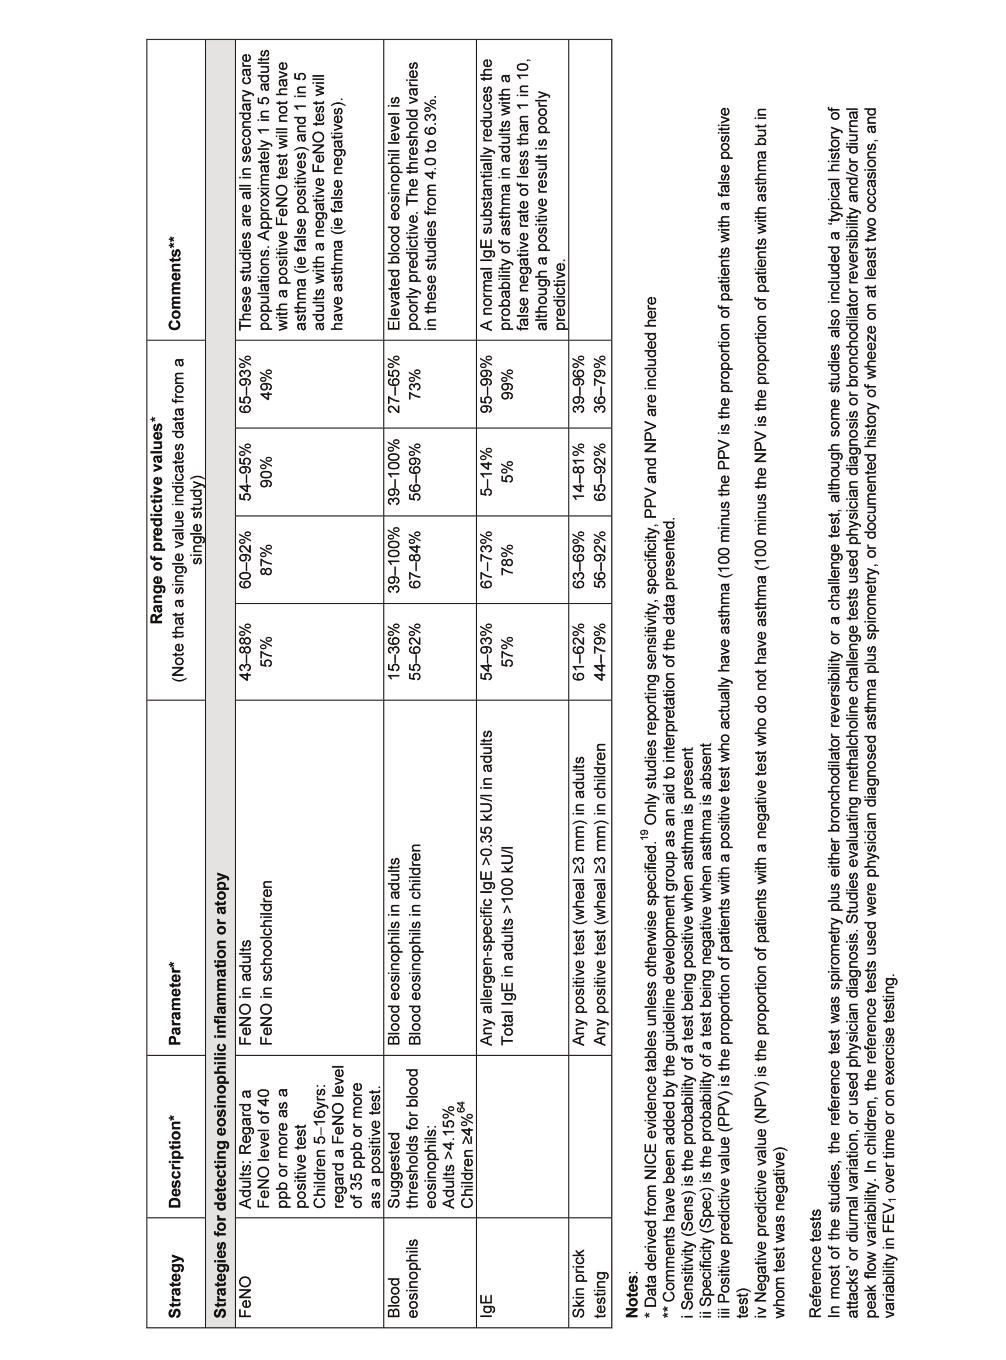 BTS/SIGN Asthma Guideline Summary of Diagnostic Tests Acknowledgements CRS-UK wishes to thank the British Thoracic Society for permission to reproduce Table 1 - summary of diagnostic tests from the